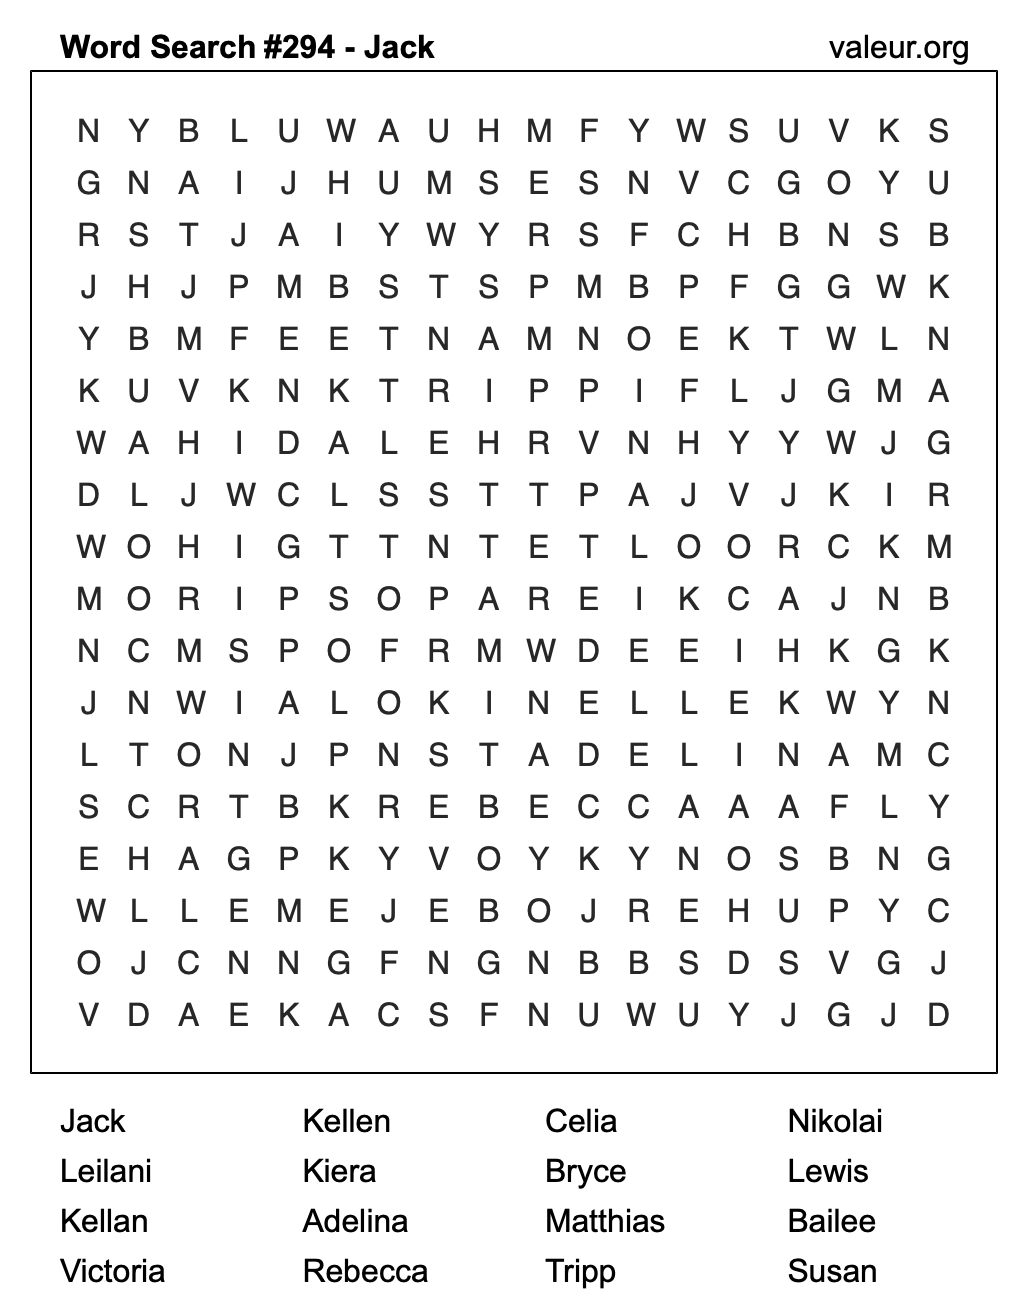 Word Search Puzzle with the name Jack #294